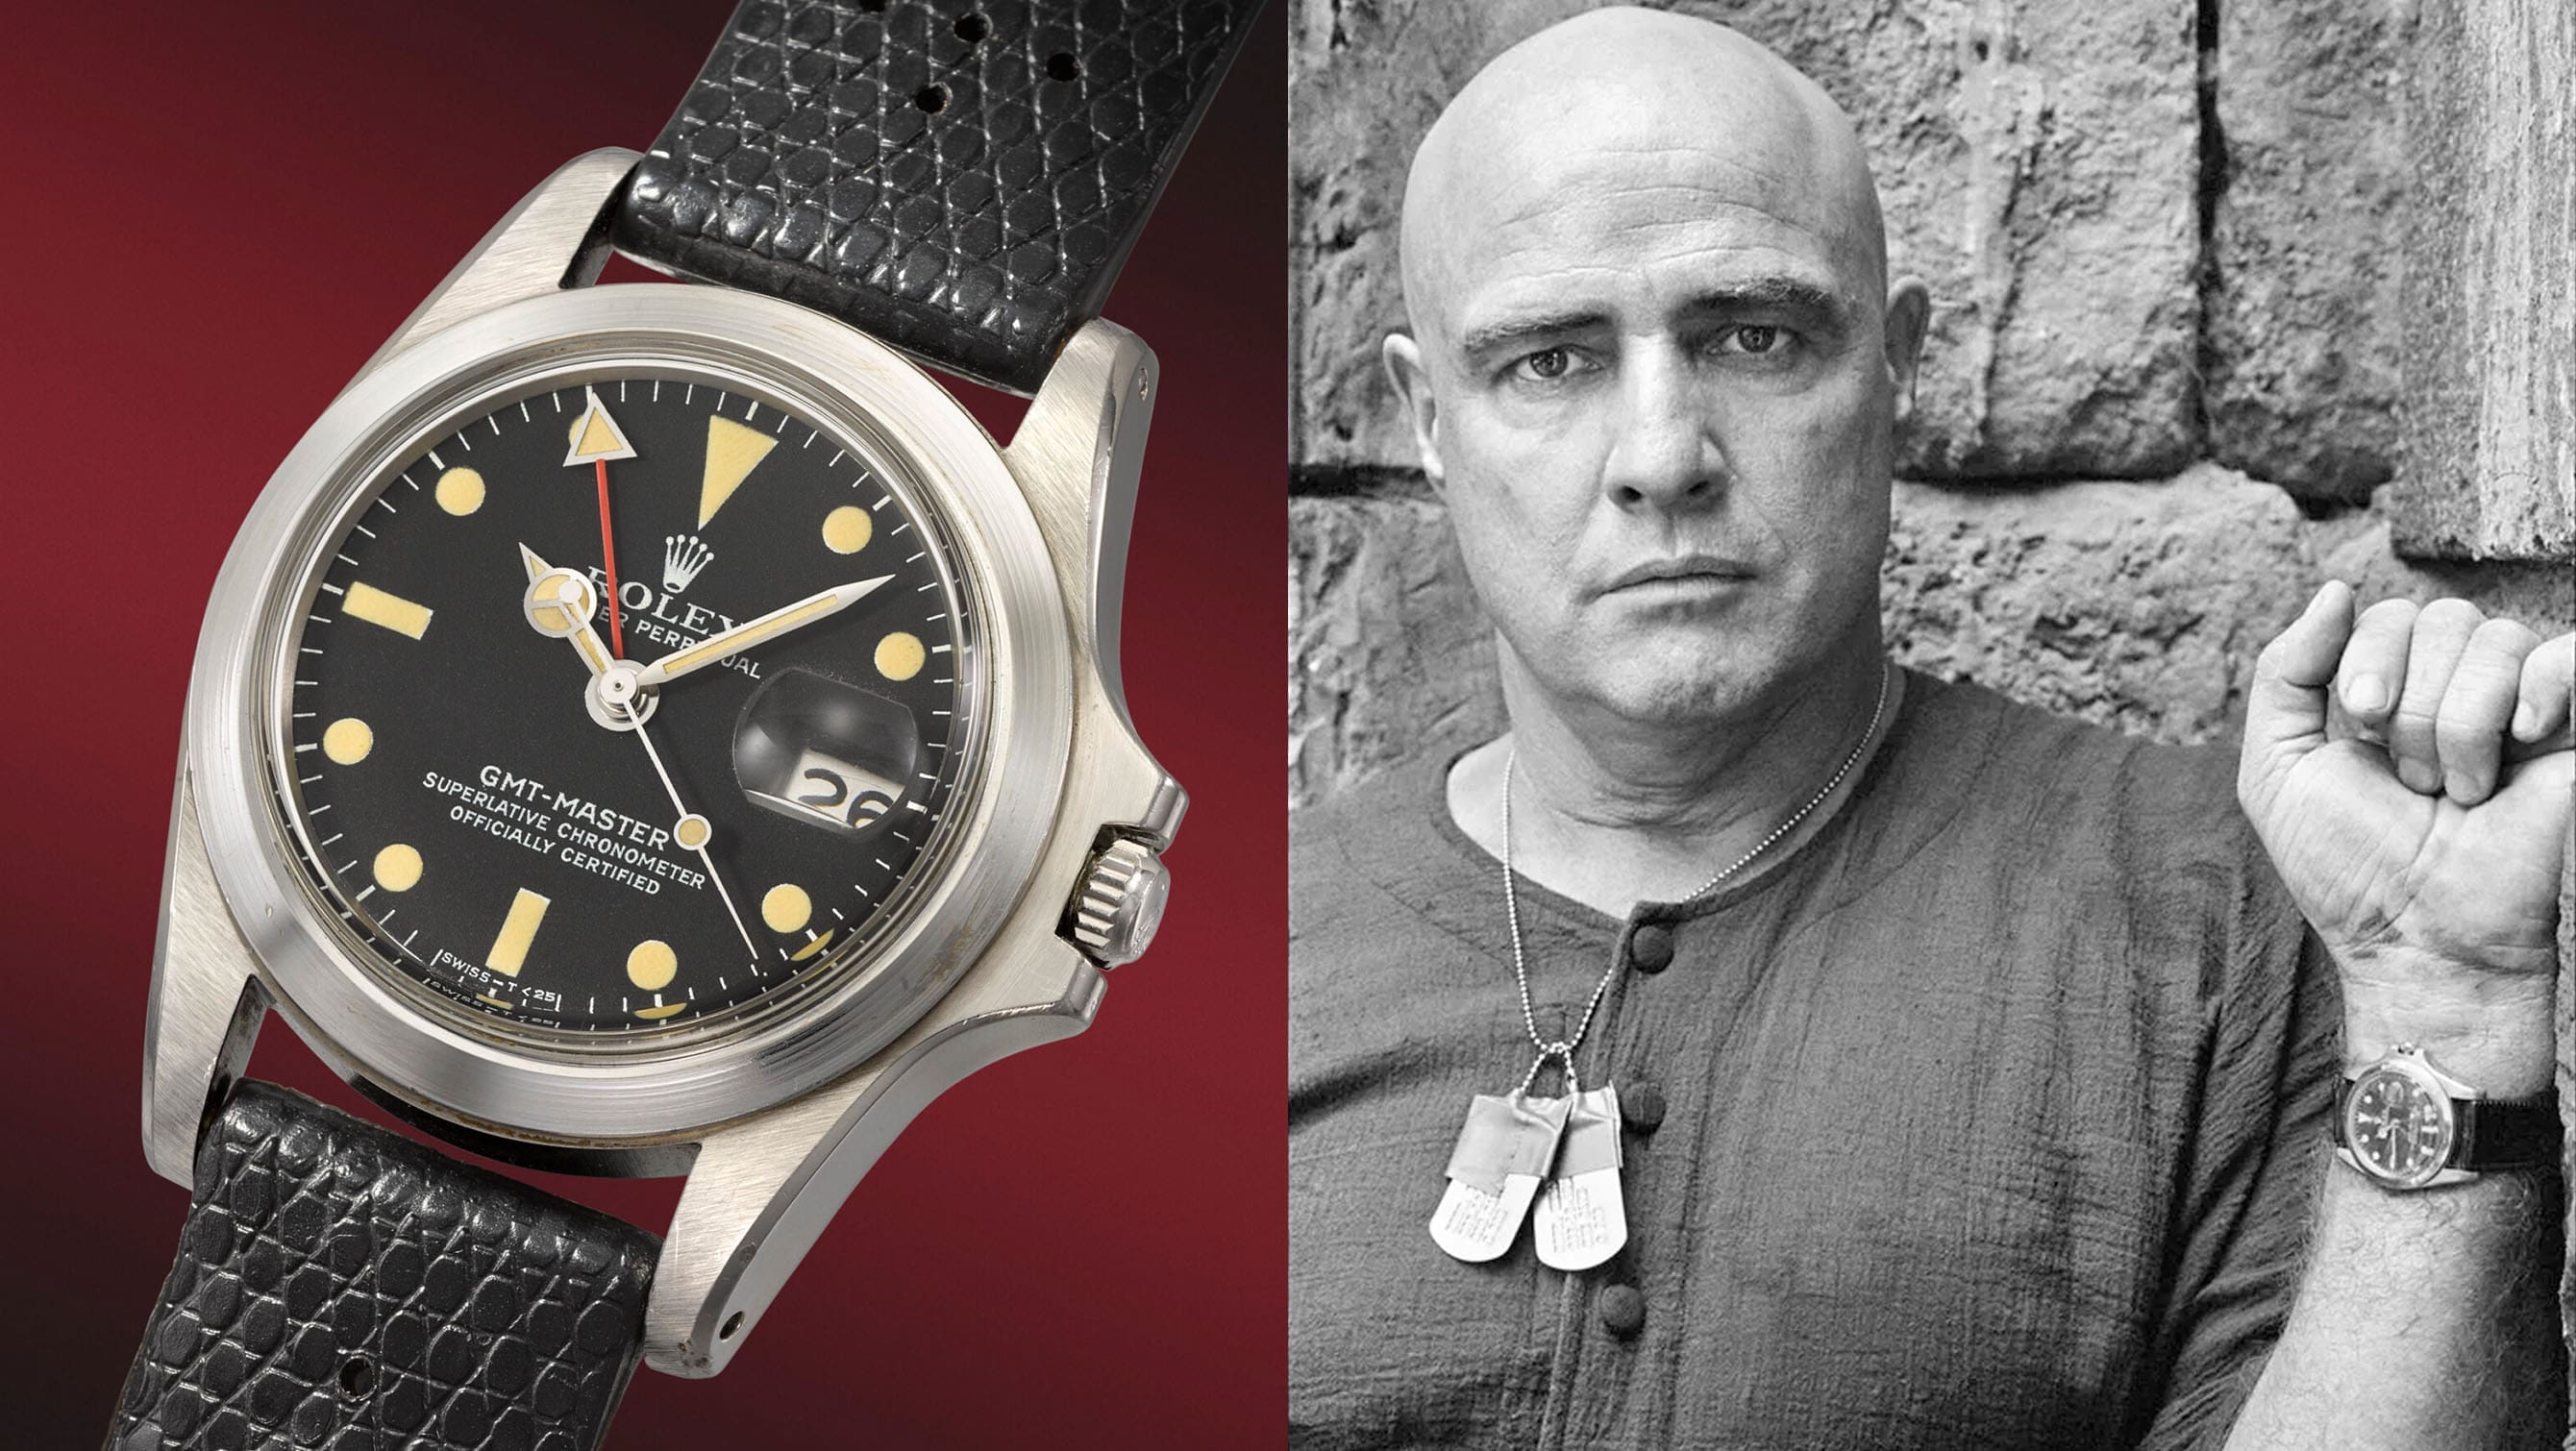 Marlon Brando’s Rolex GMT-Master is up for auction again. What will Kurtz’s watch bring this time?